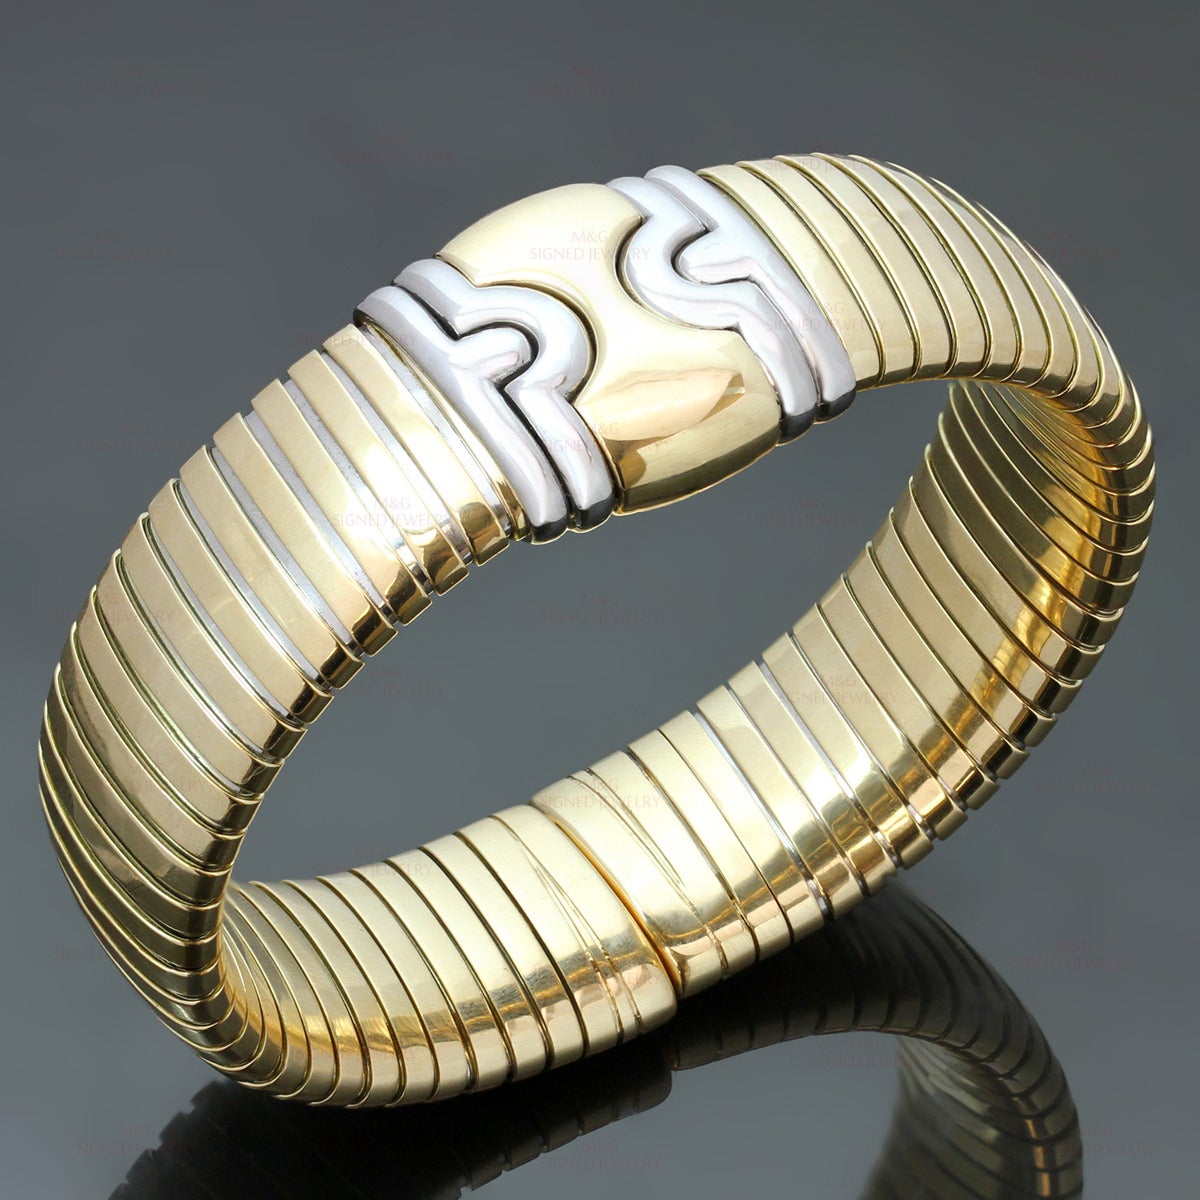 This elegant Bvlgari bracelet from the iconic Tubogas collection is crafted in 18k yellow gold and completed with 18k white gold accents. Made in Italy circa 1990s. Measurements: 0.70